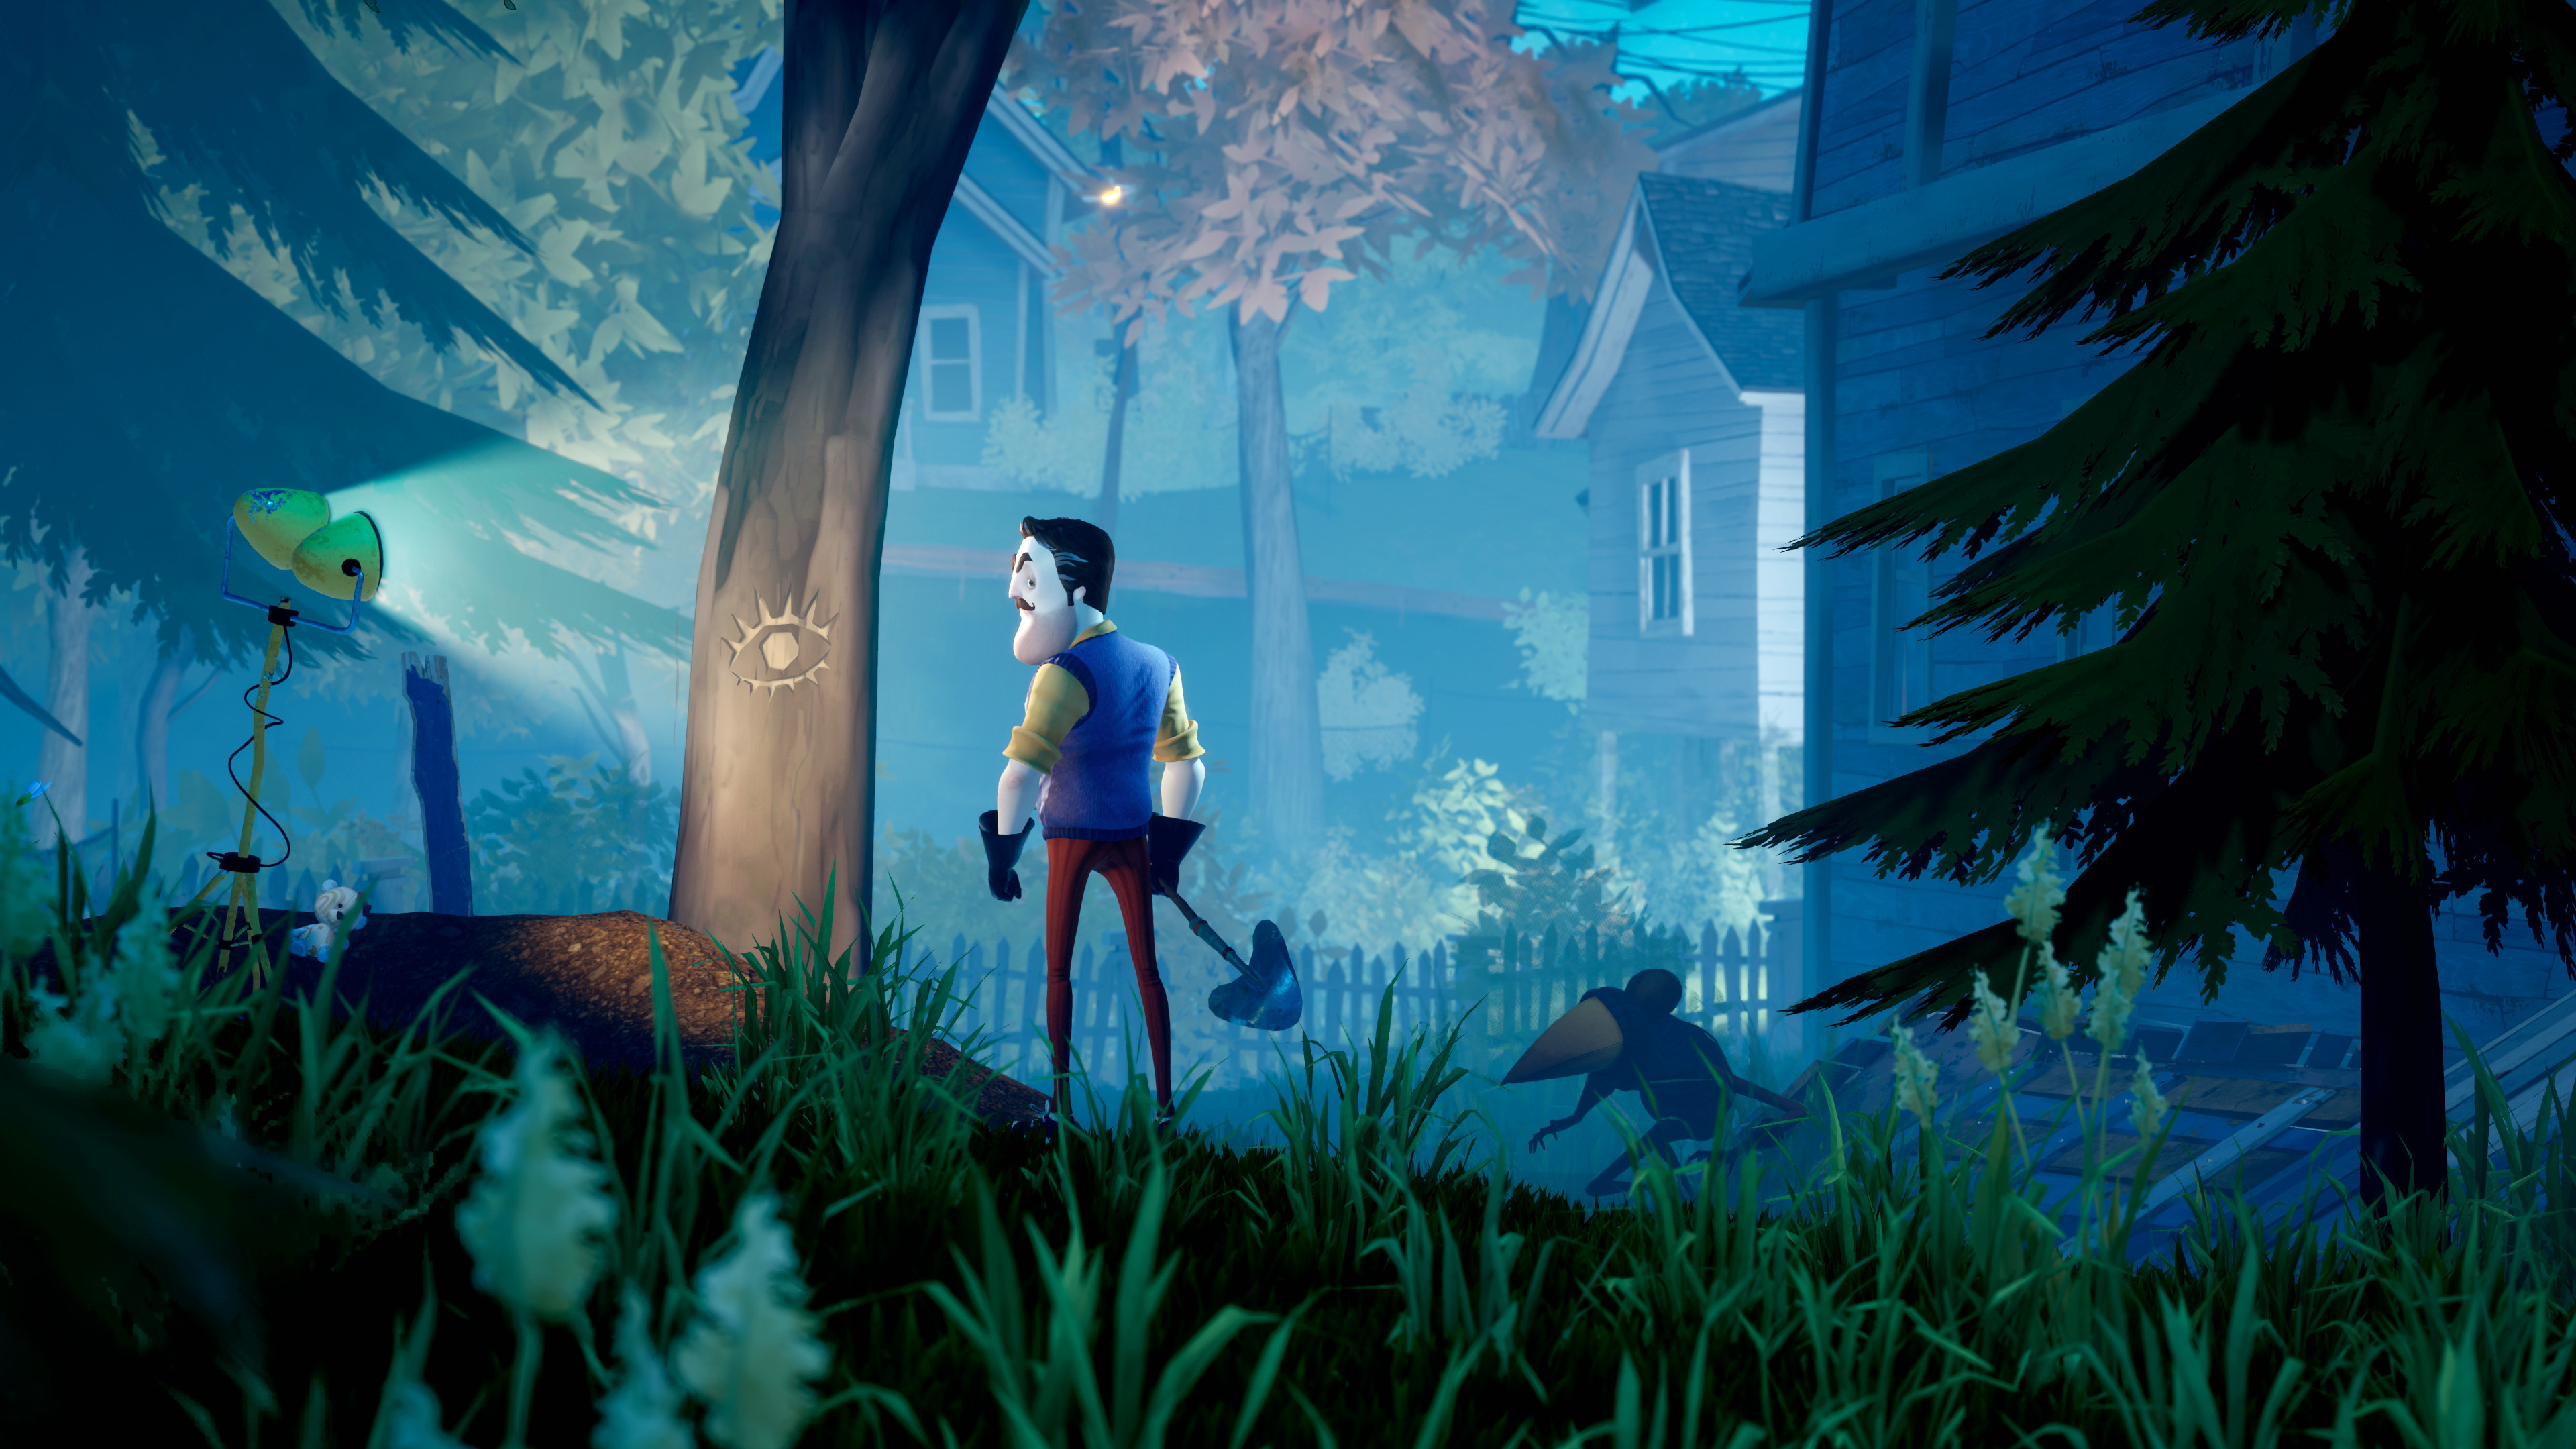 Hello Neighbor 2 (Game): An upcoming stealth horror thriller, Playing as a local journalist named Quentin. 3840x2160 4K Background.